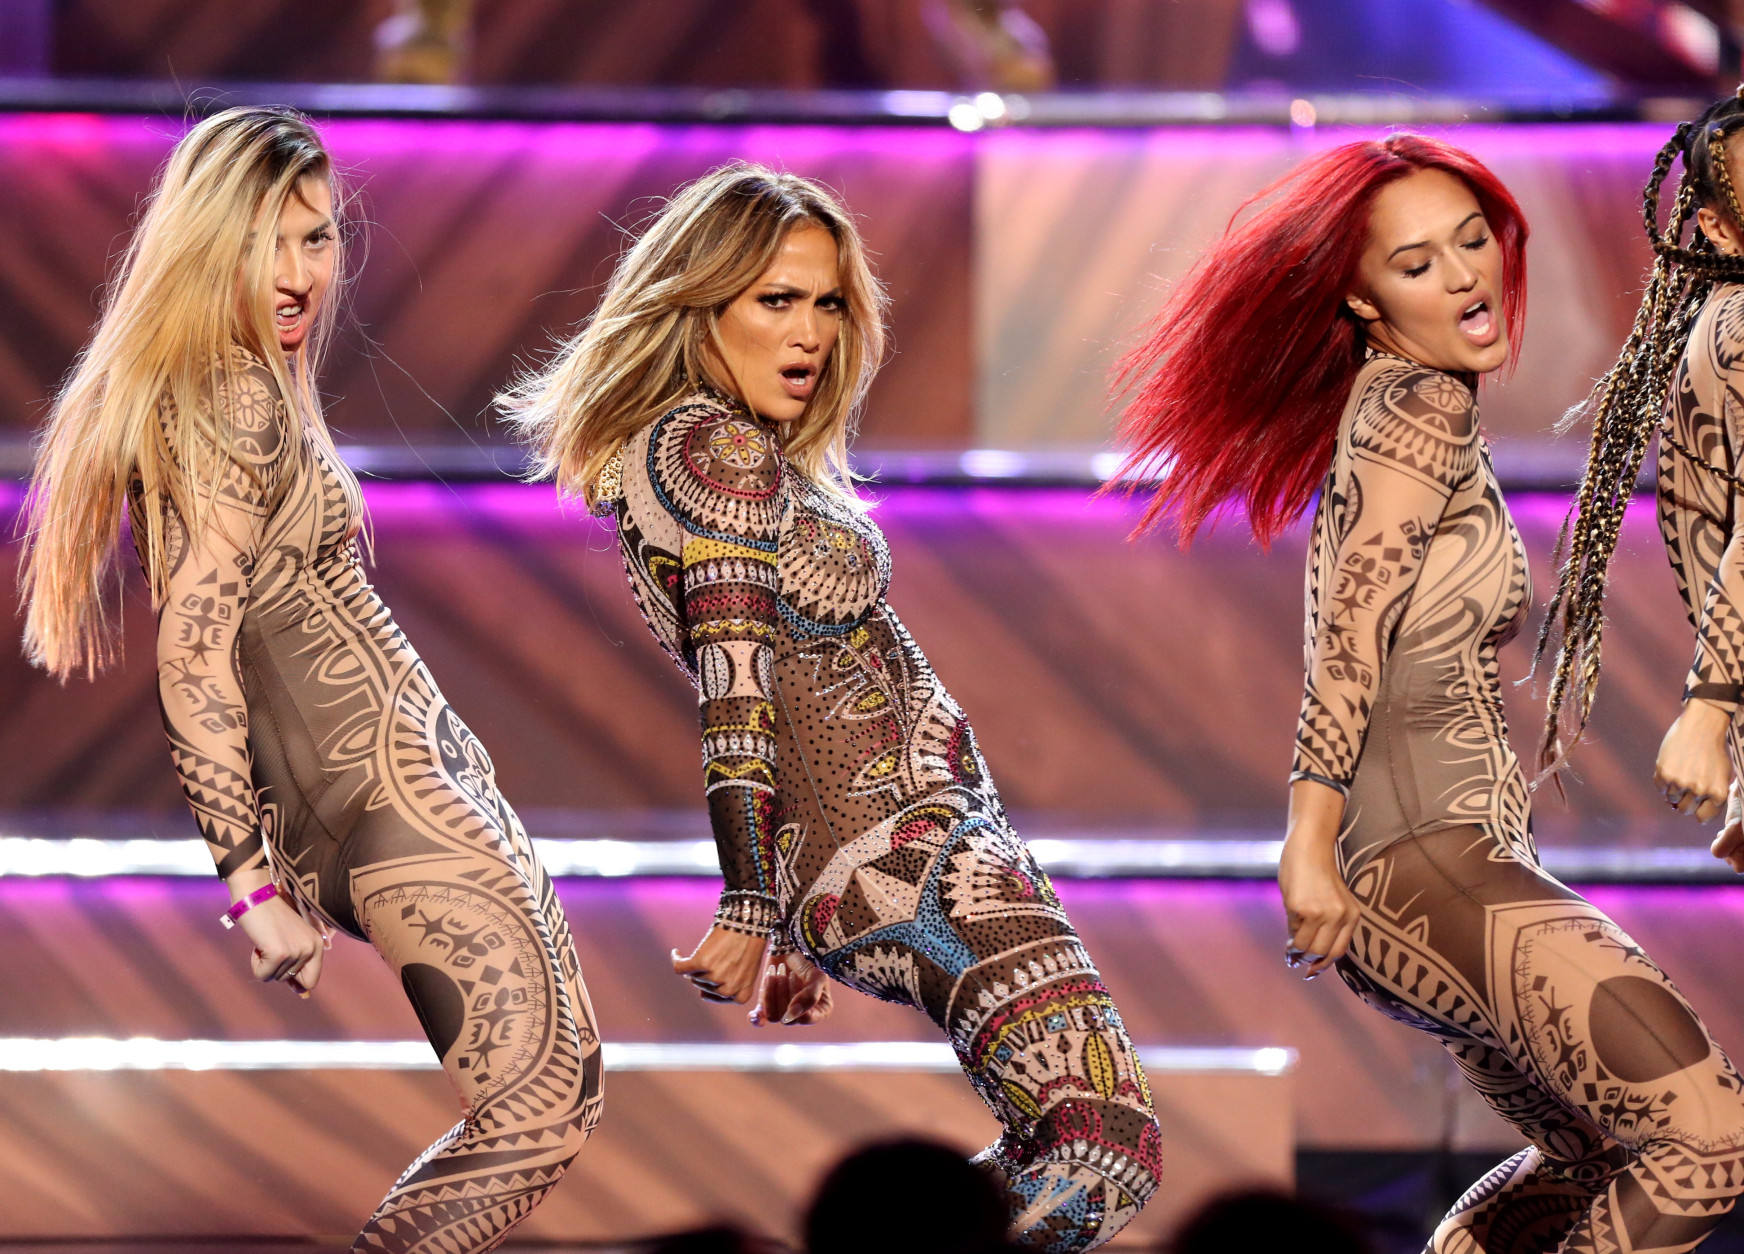 Jennifer Lopez, center, performs at the American Music Awards at the Microsoft Theater on Sunday, Nov. 22, 2015, in Los Angeles. (Photo by Matt Sayles/Invision/AP)